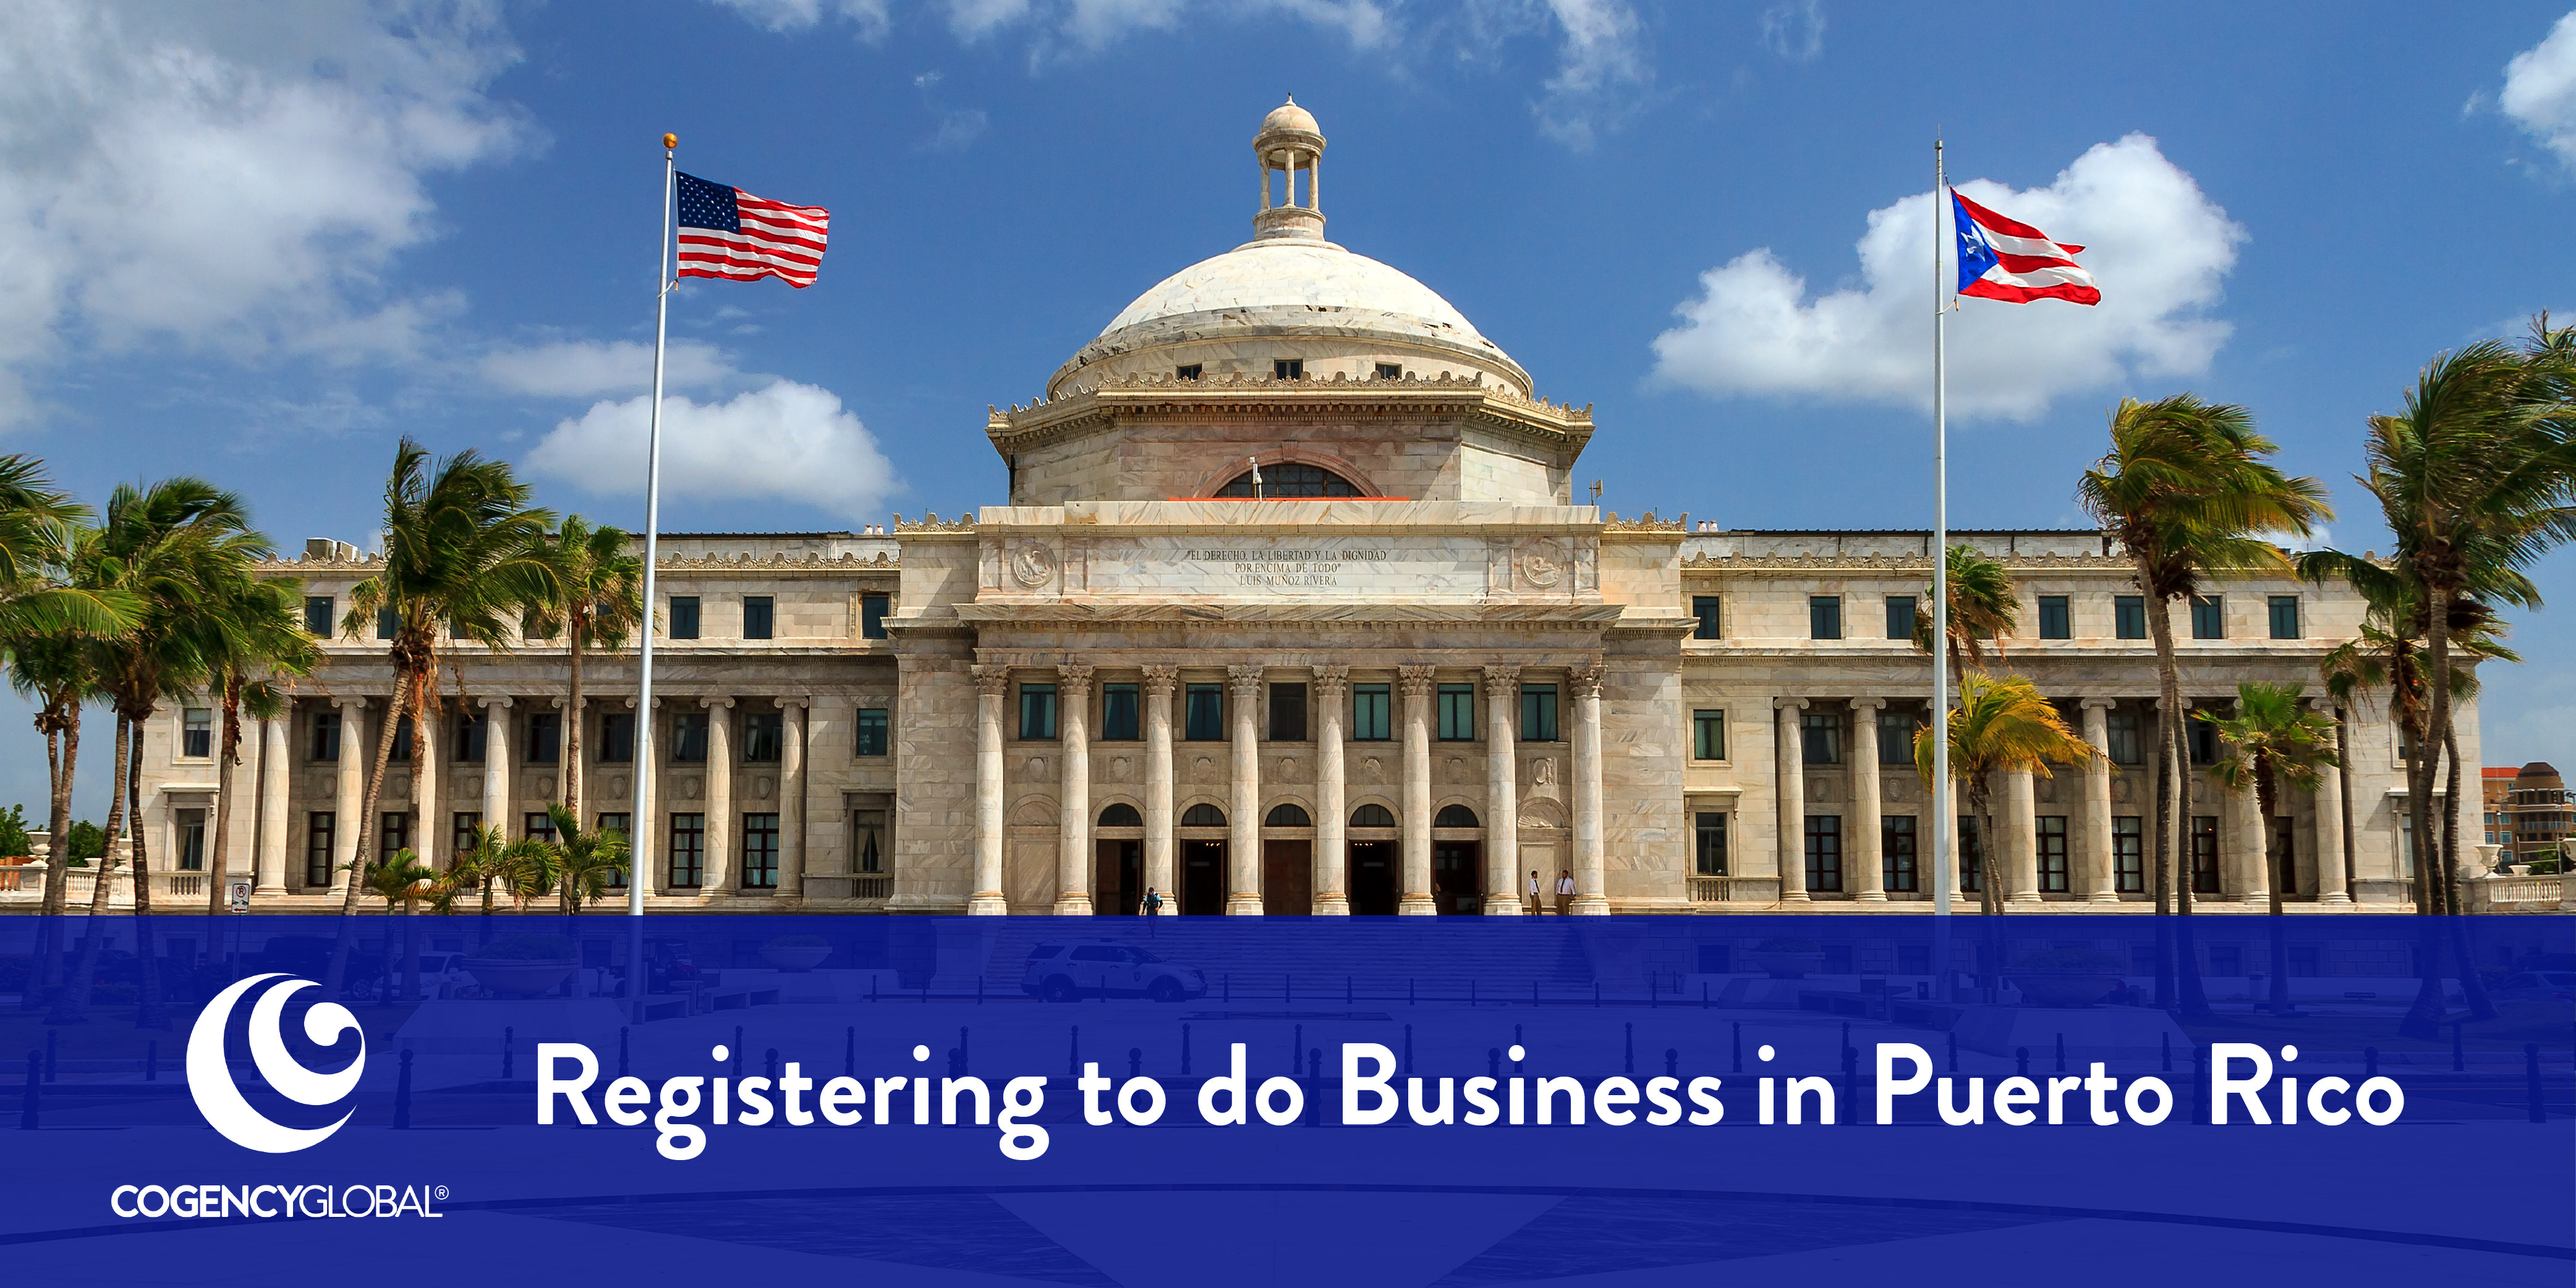 Registering to do Business in Puerto Rico